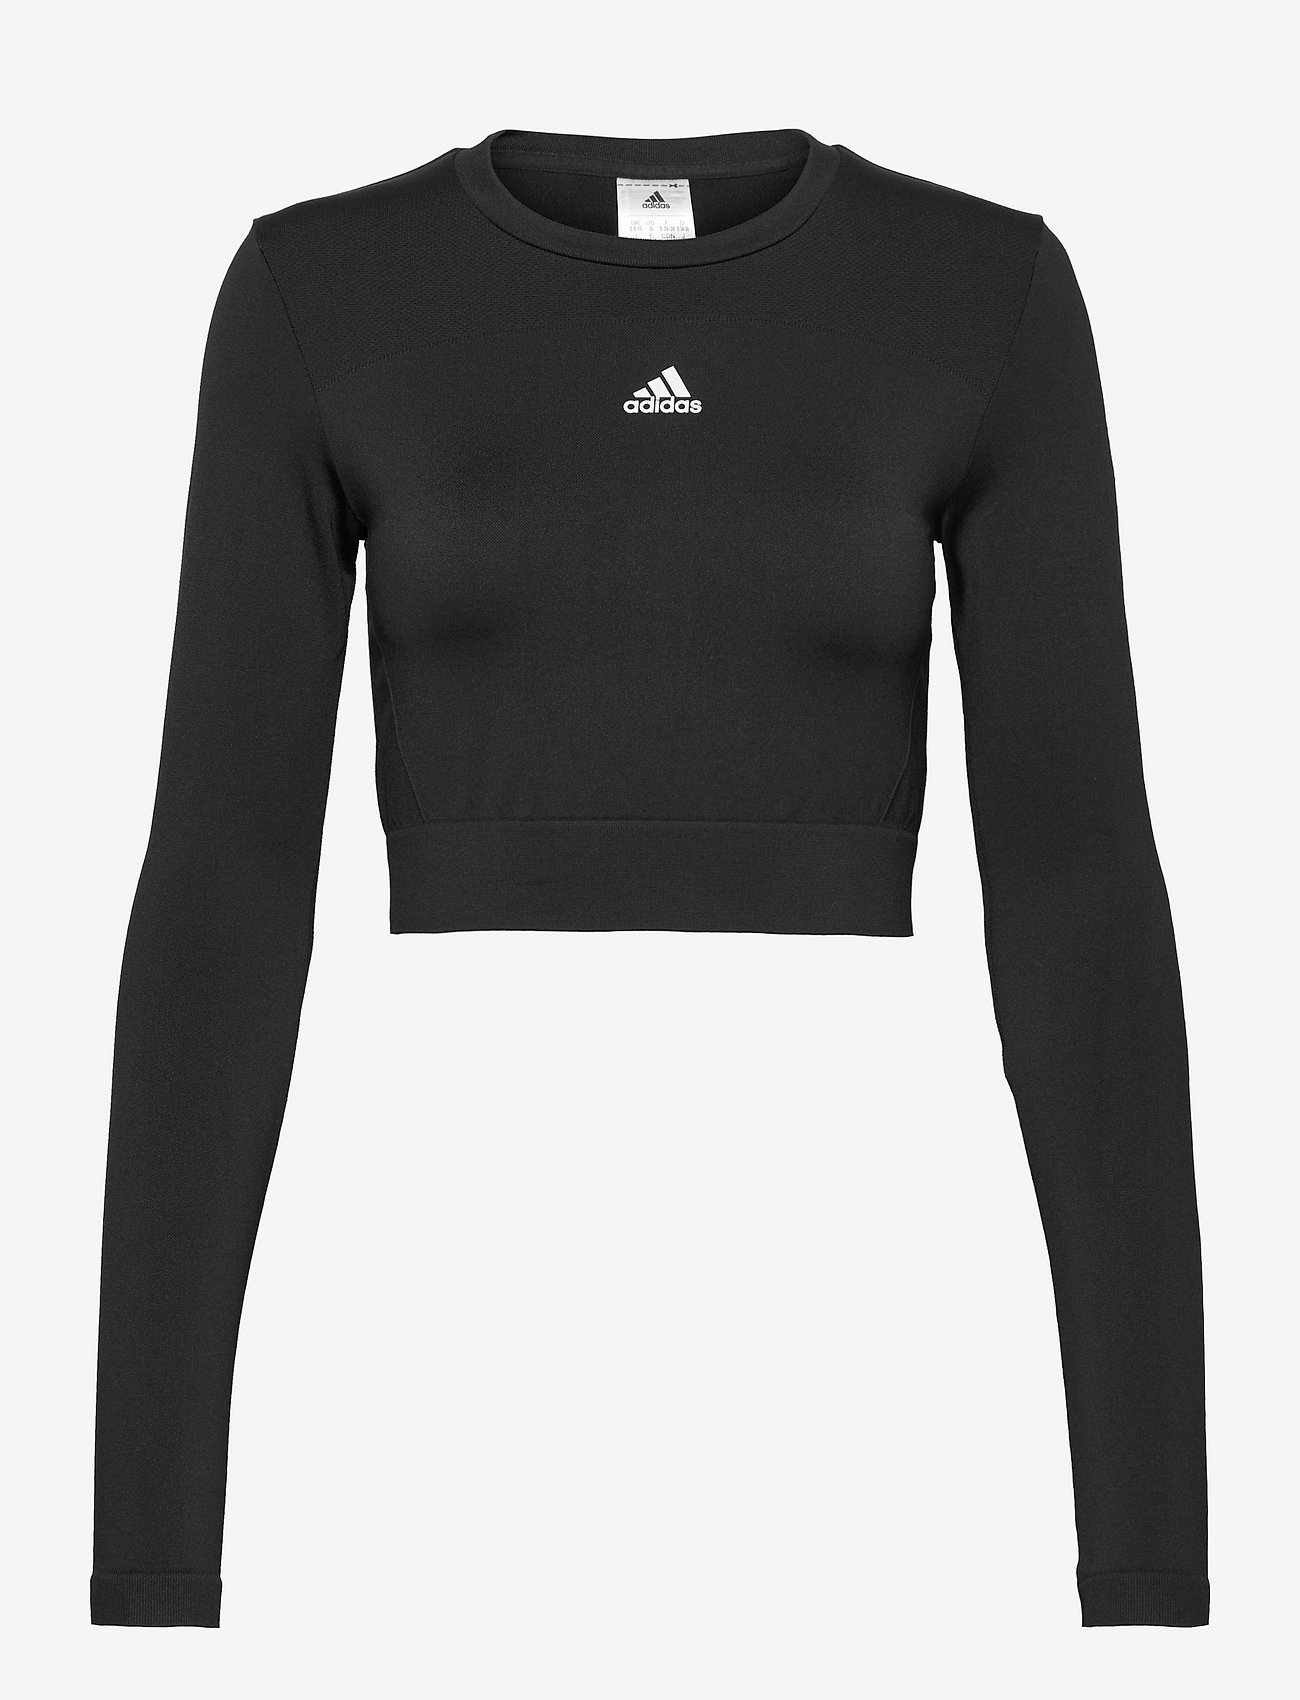 adidas Performance - adidas AEROKNIT Seamless Fitted Cropped Long-Sleeve Top - navel shirts - black/white - 0